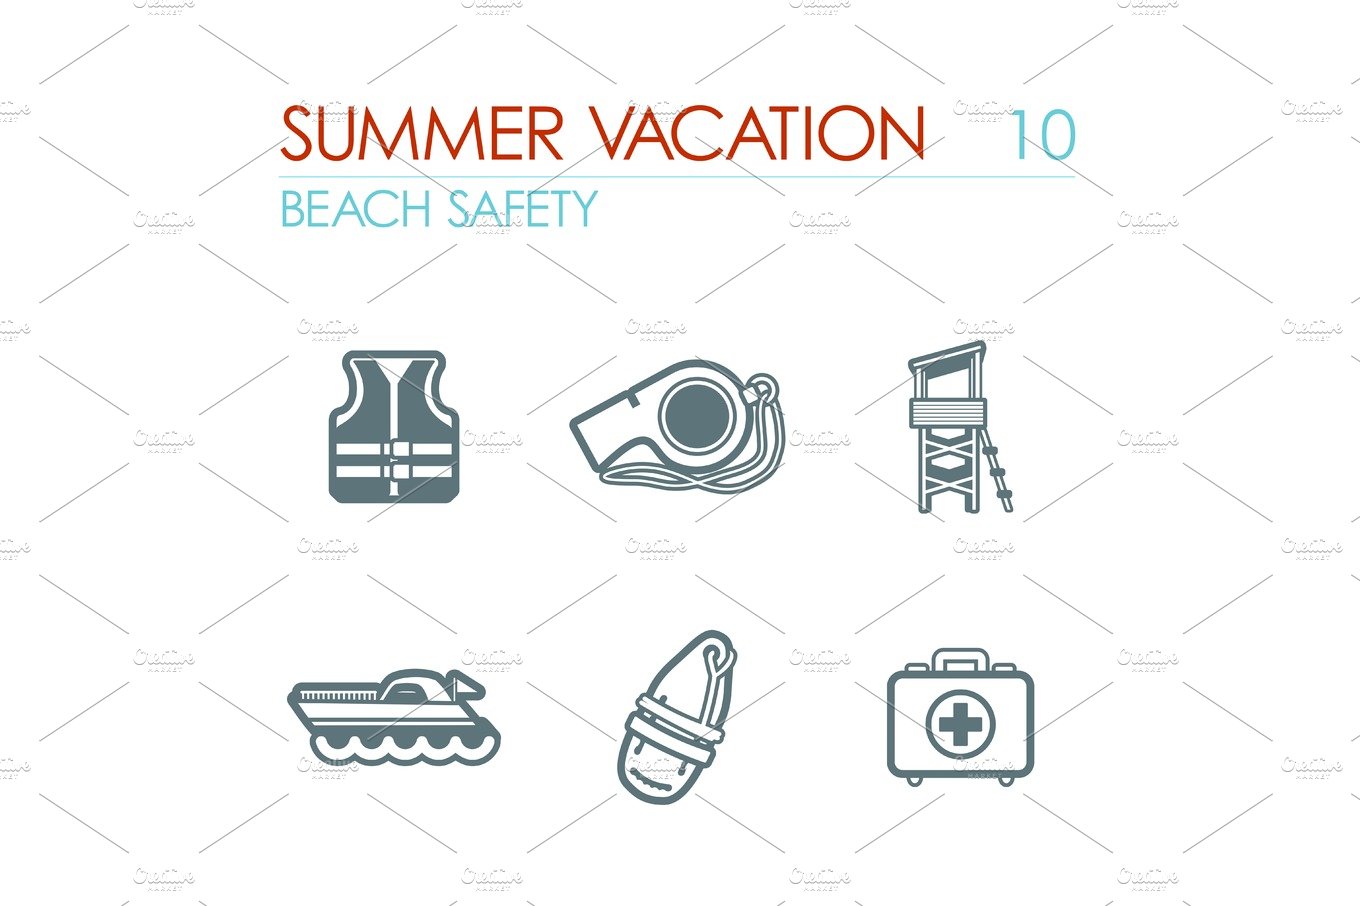 Lifeguard beach safety icon set. Summer. Vacation cover image.